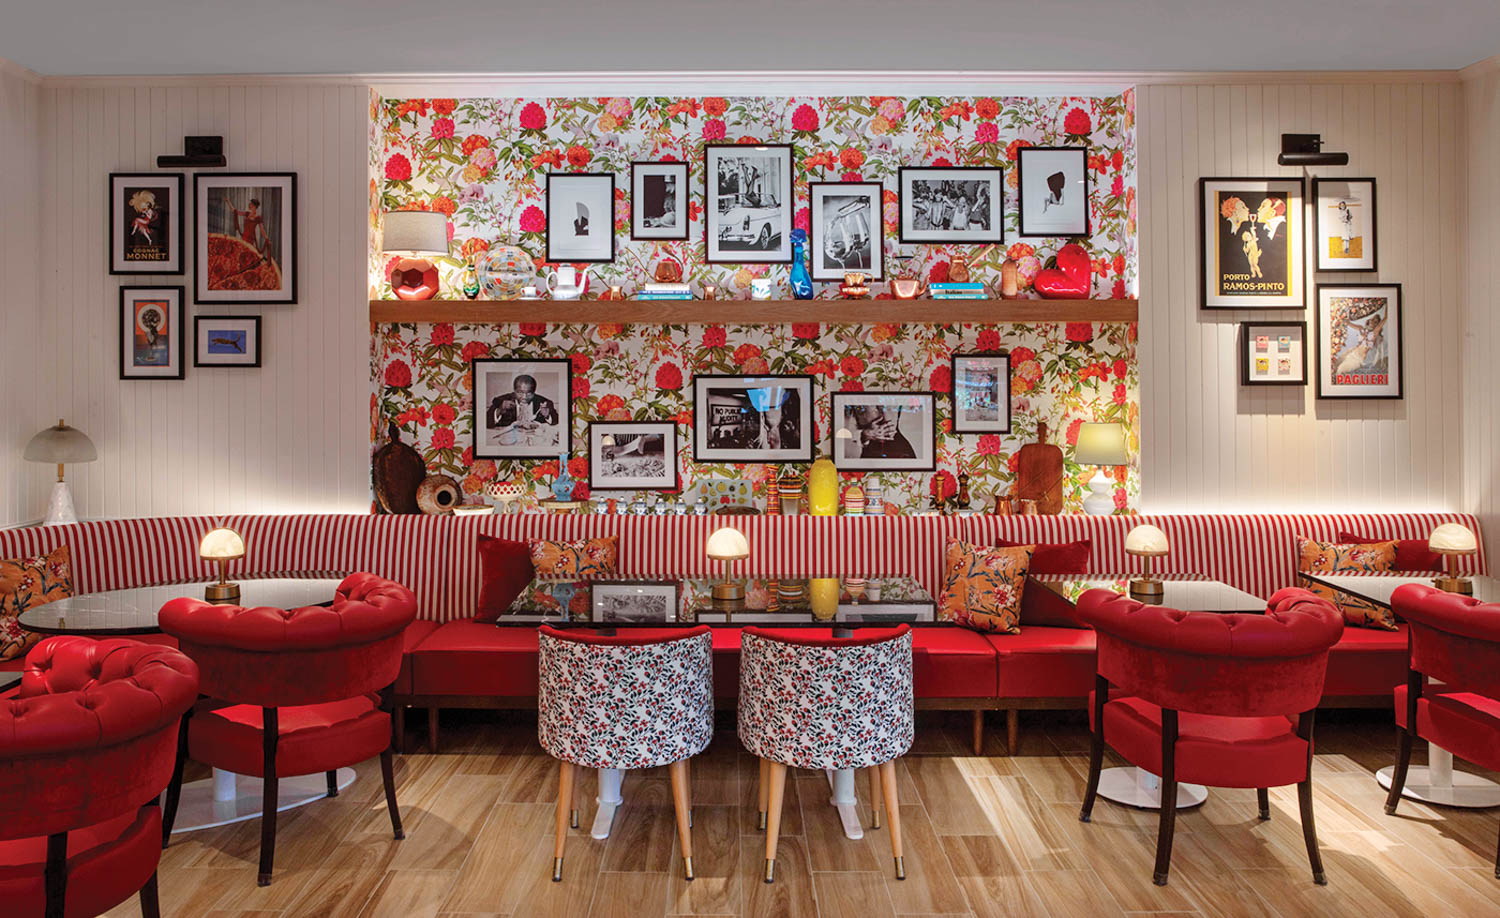 Dining area with red chairs and wall with lots of post-its